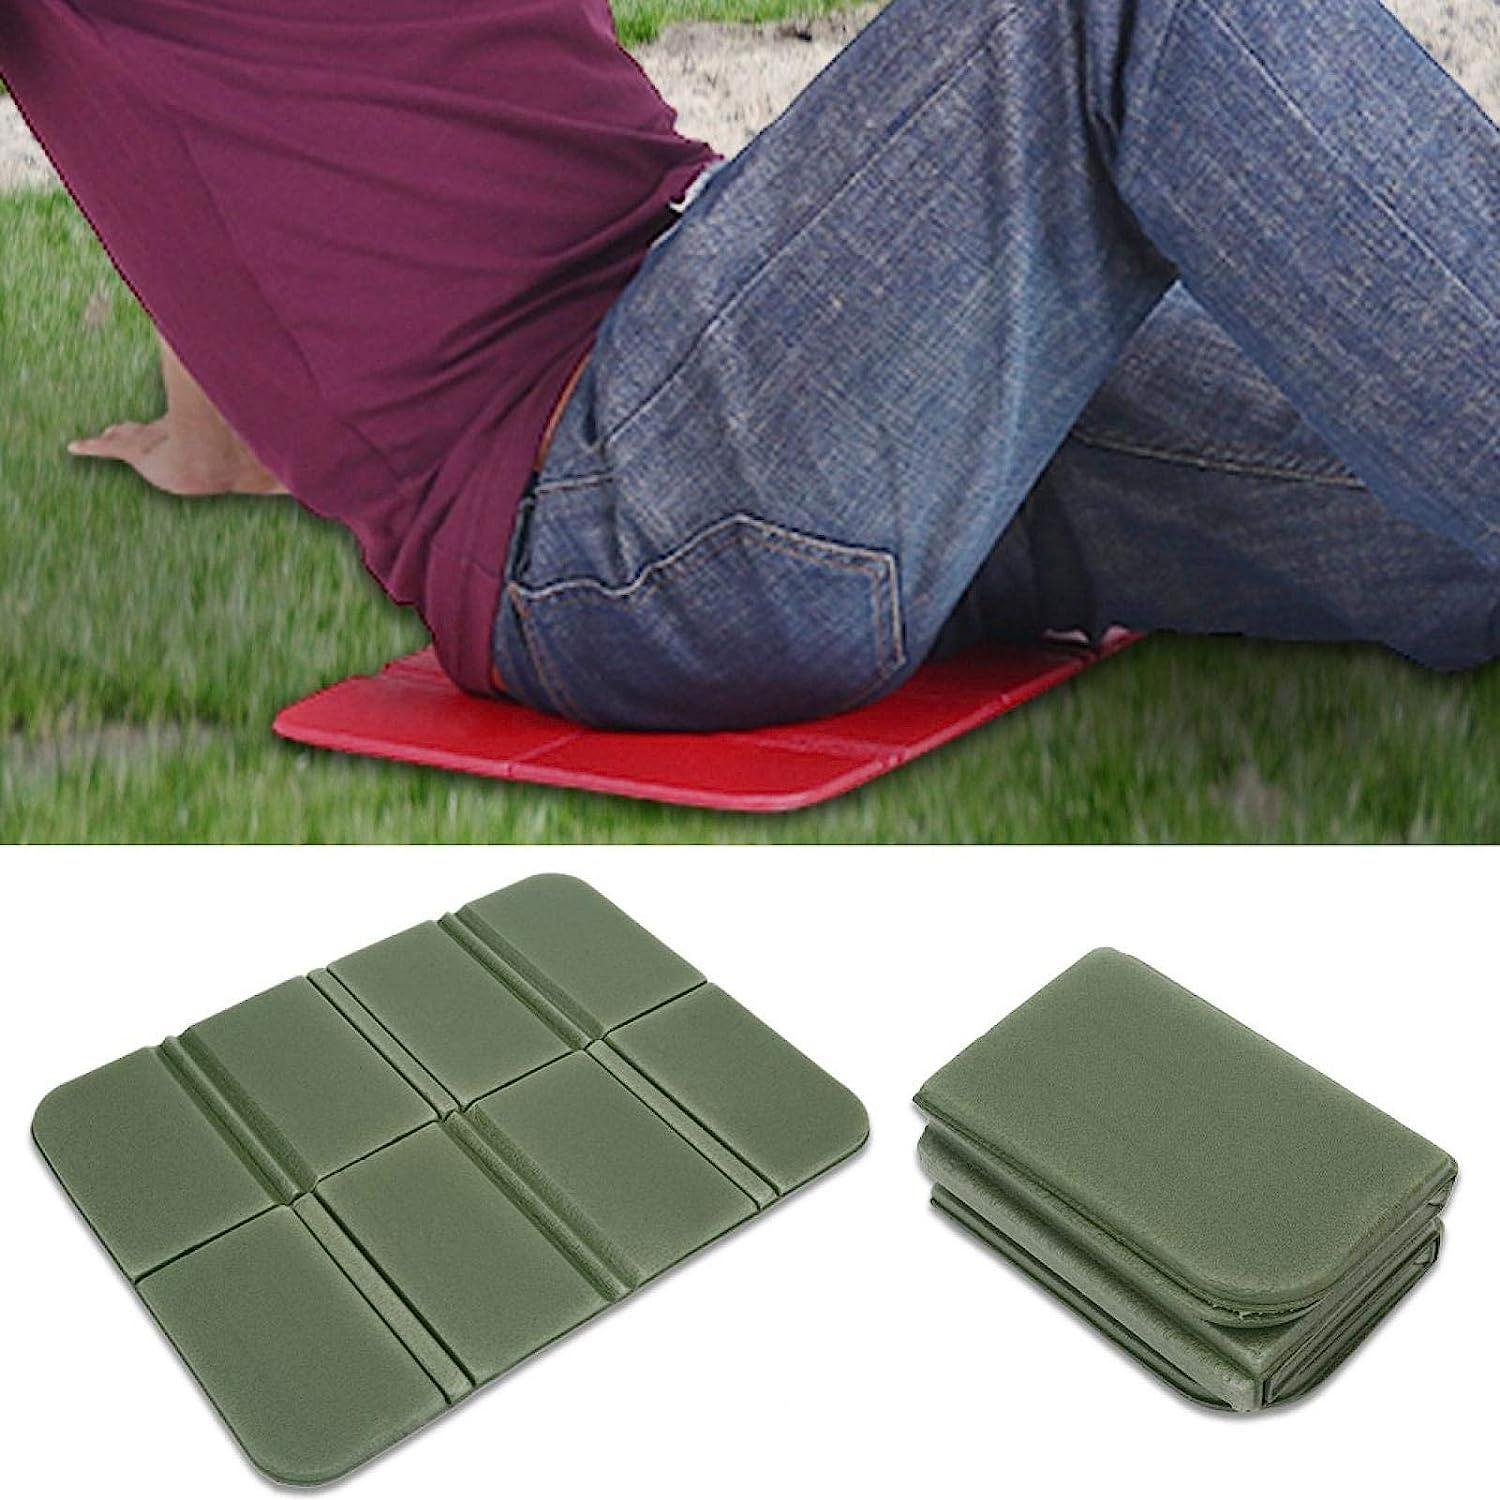 Outdoor Seat Cushion Foldable, Foldable Seat Pad Seat Mat Water-repellent  Portable, Made Of Oxford Fabric, With Key Ring, For Outdoor Playground  Campi